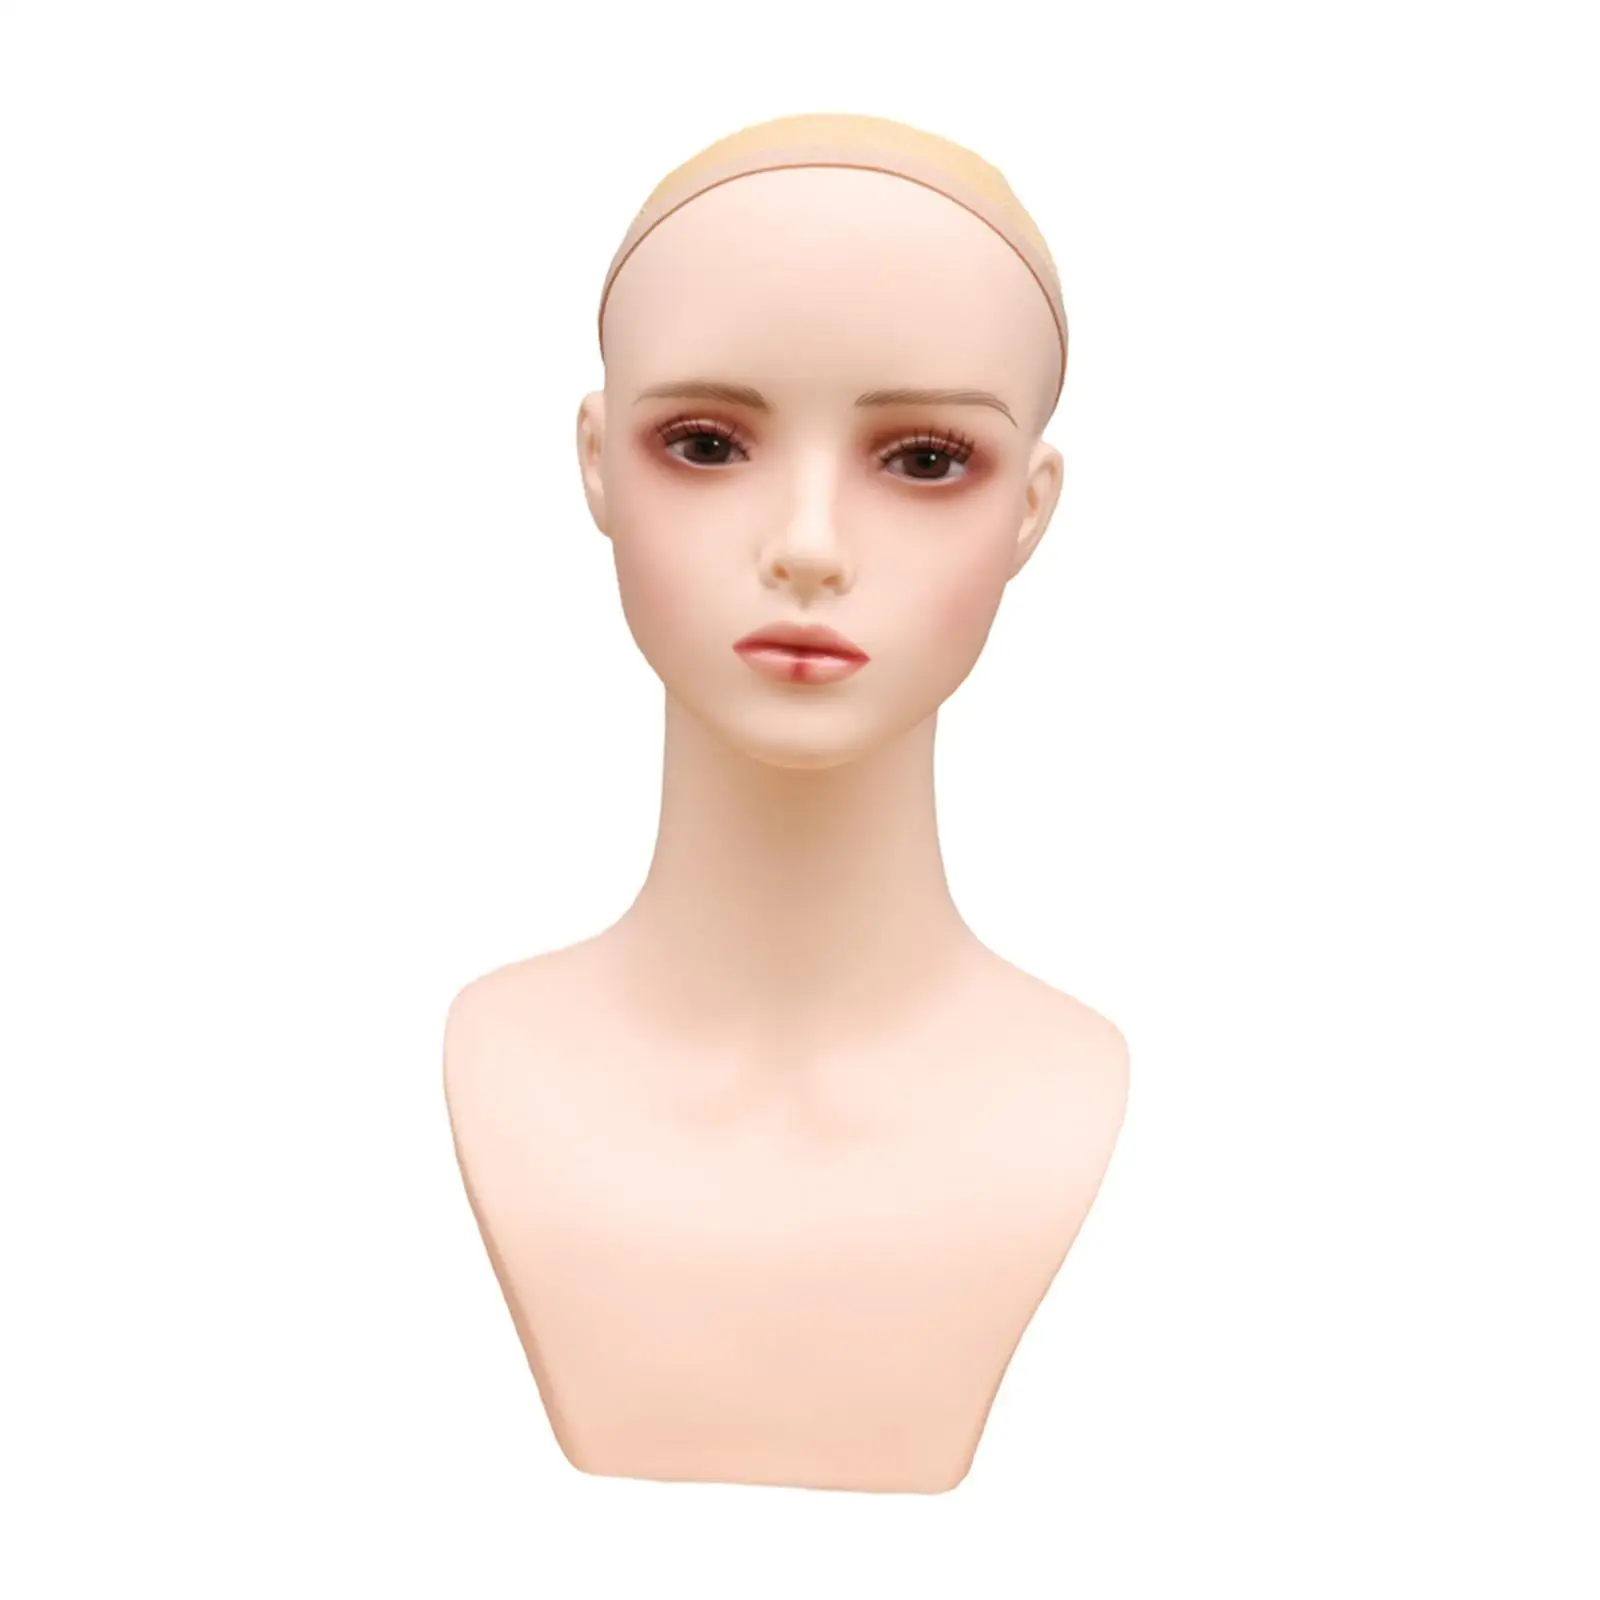 Realistic Female Mannequin Head Manikin Wig Display Model for Hairpieces Necklace Hats Wigs Displaying Making Styling